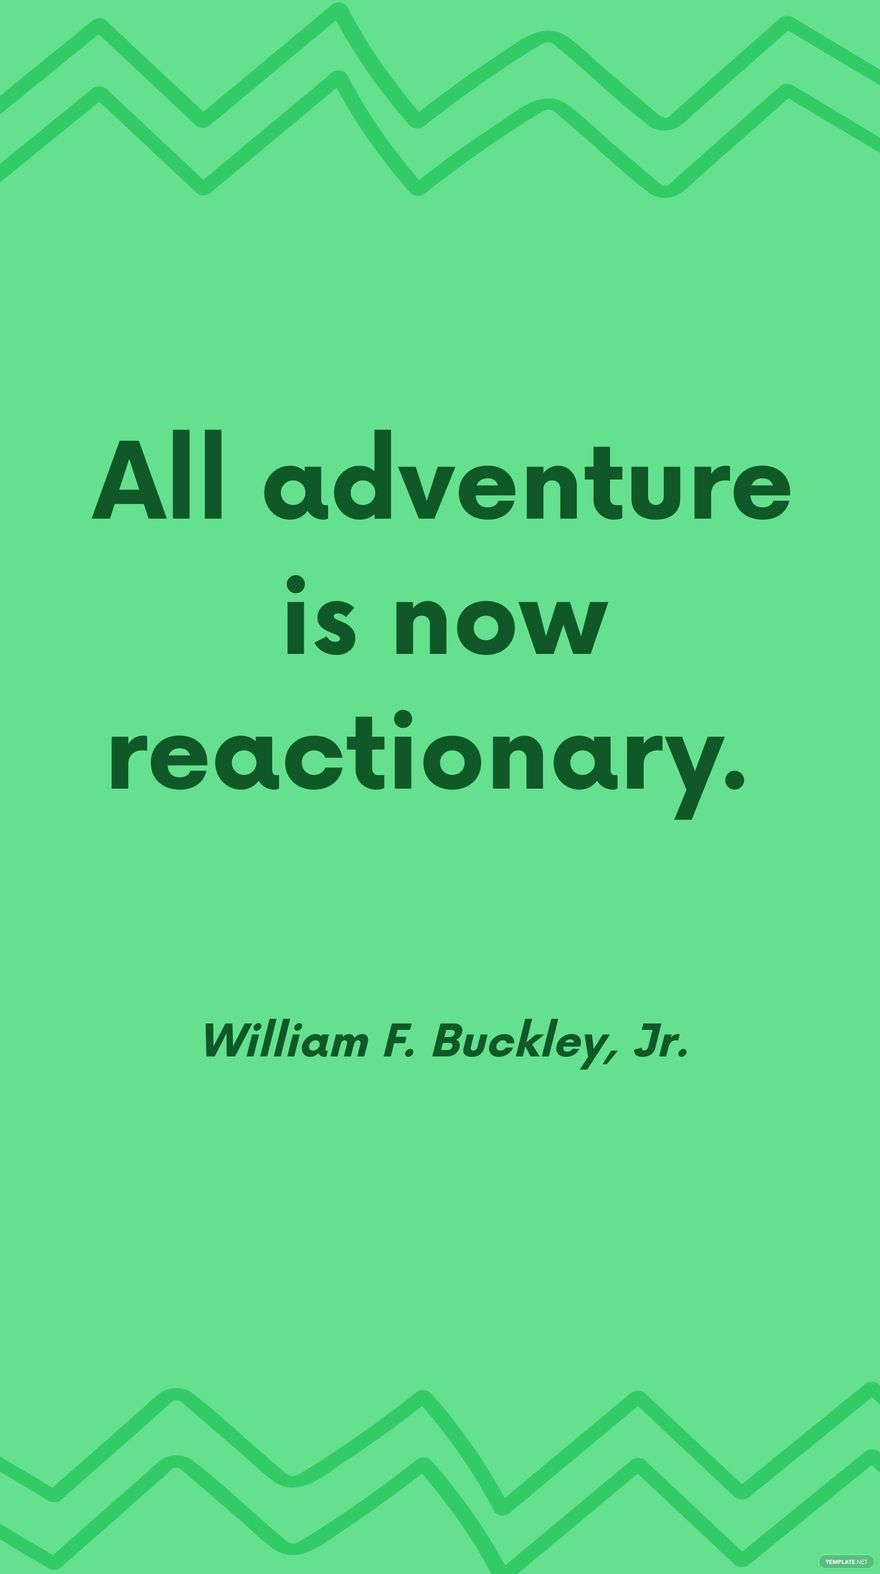 Free William F. Buckley, Jr. - All adventure is now reactionary. in JPG